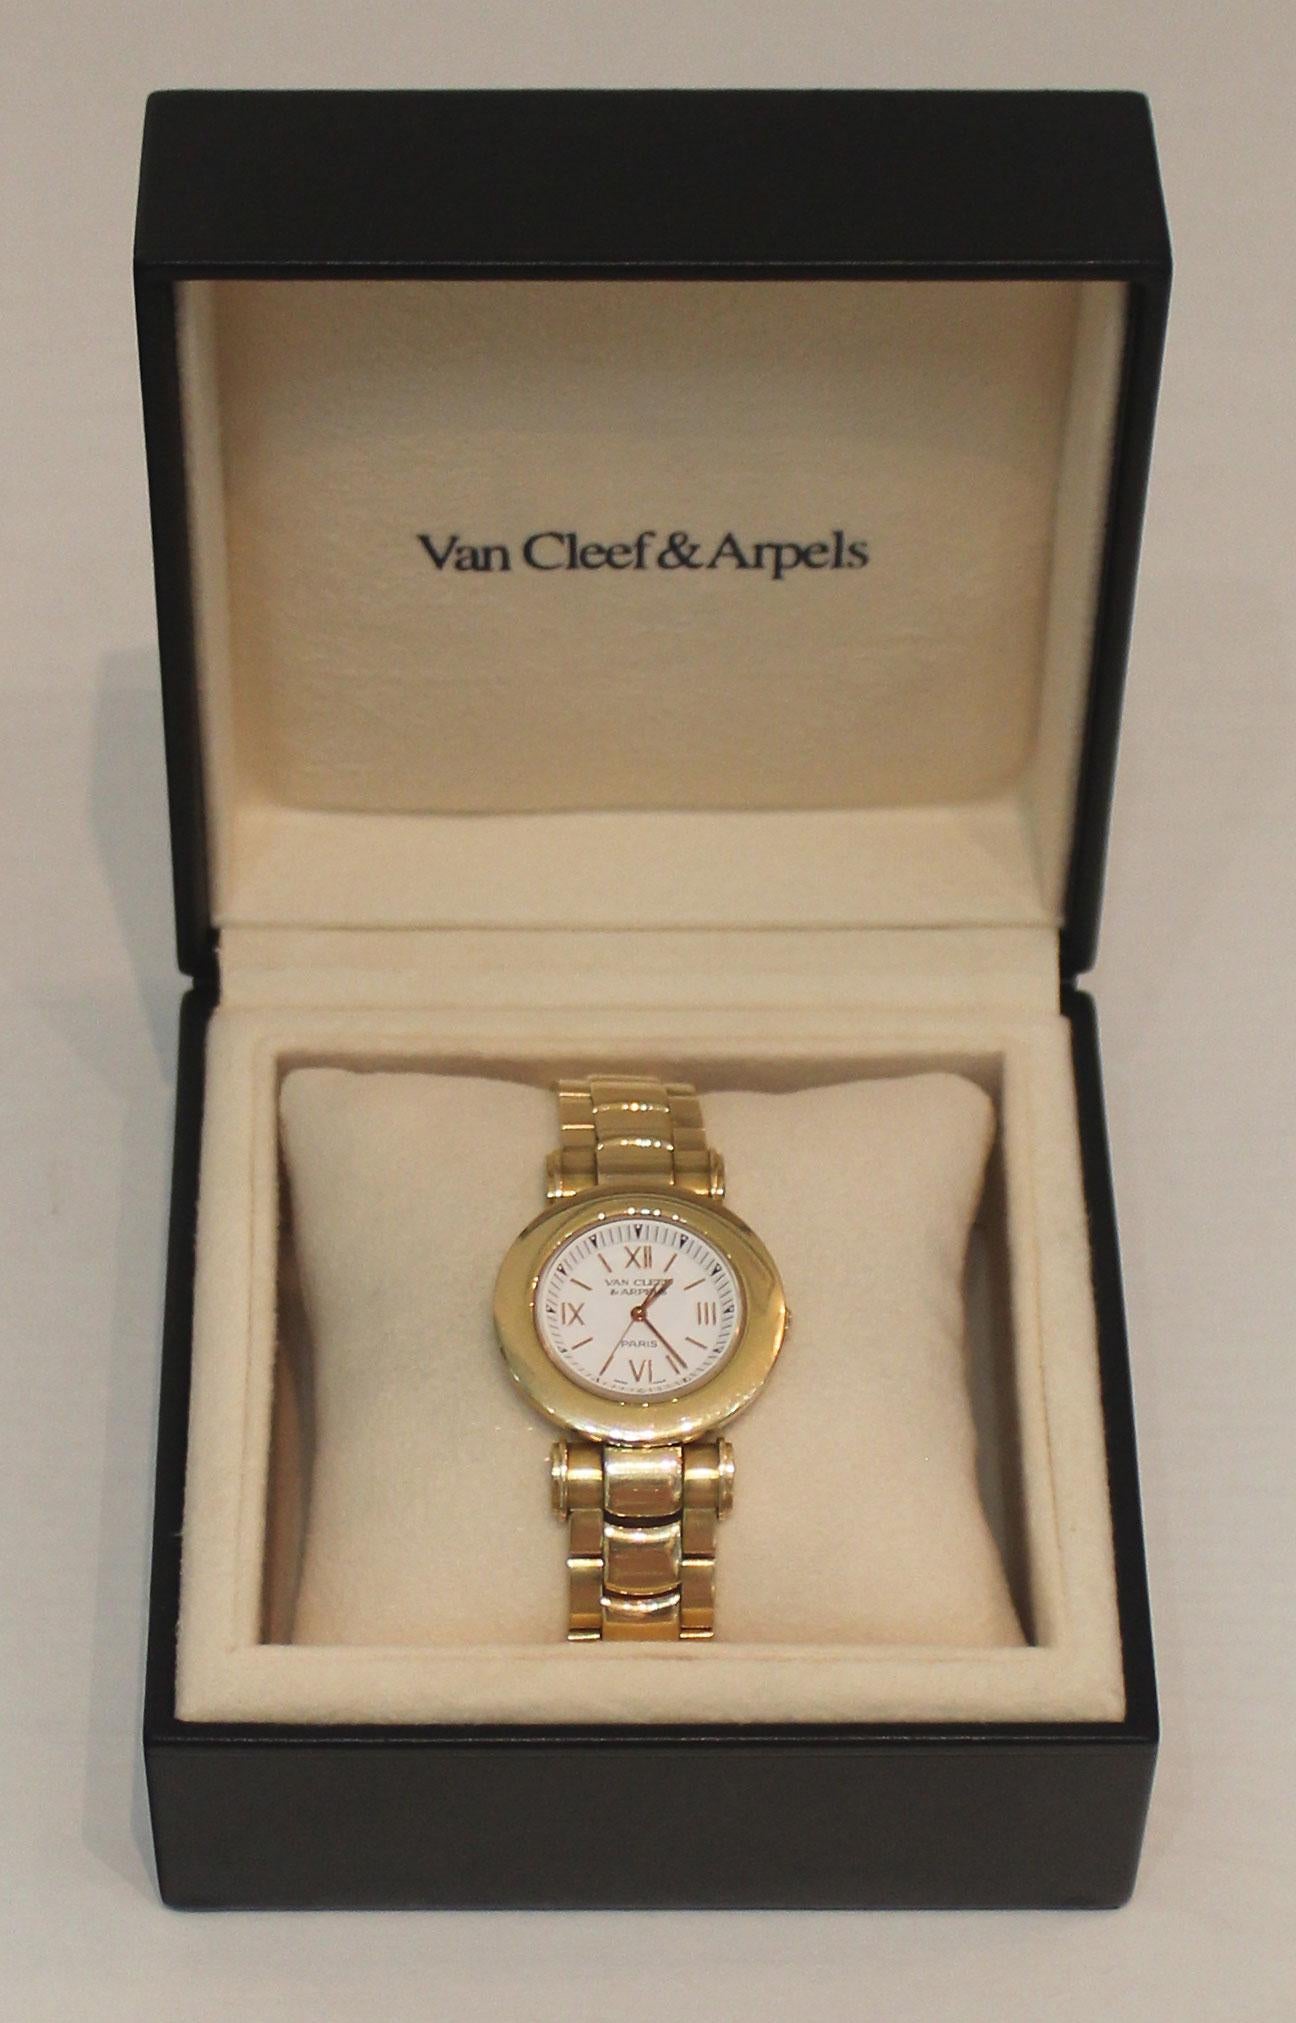 Van Cleef & Arpels Ladies 18K Yellow Gold Dress Watch - This watch is Swiss made with a quartz movement. The case is 33.5 mm and the watch weighs 120.5 grams w/solid gold links. The watch is 6.5 inches long with 2 extra links that add one additional